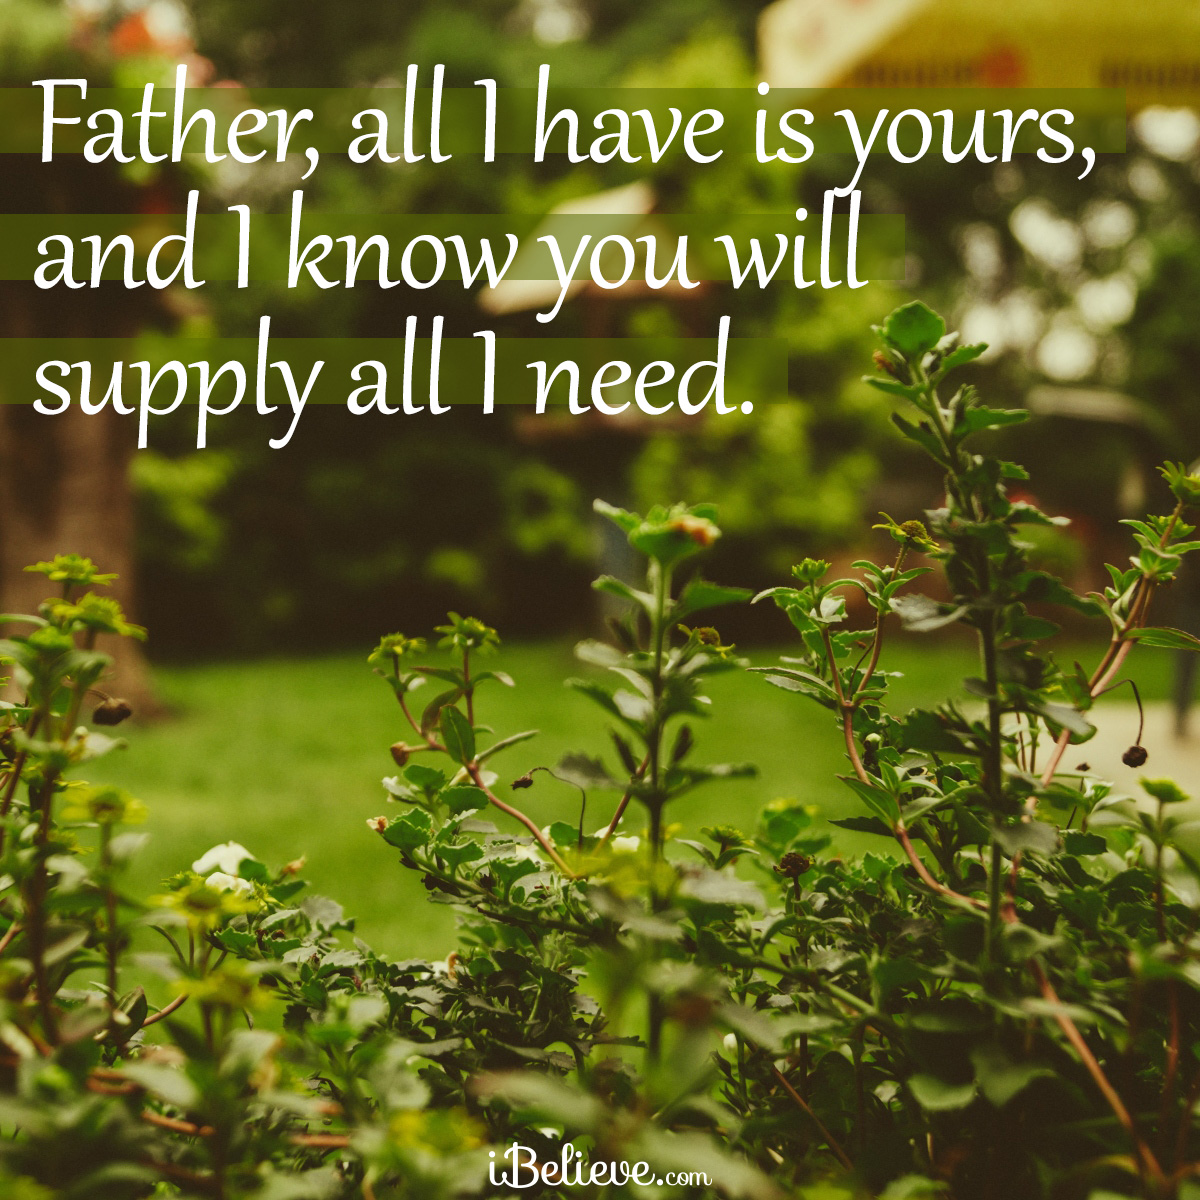 Inspirational image, God will supply all you need